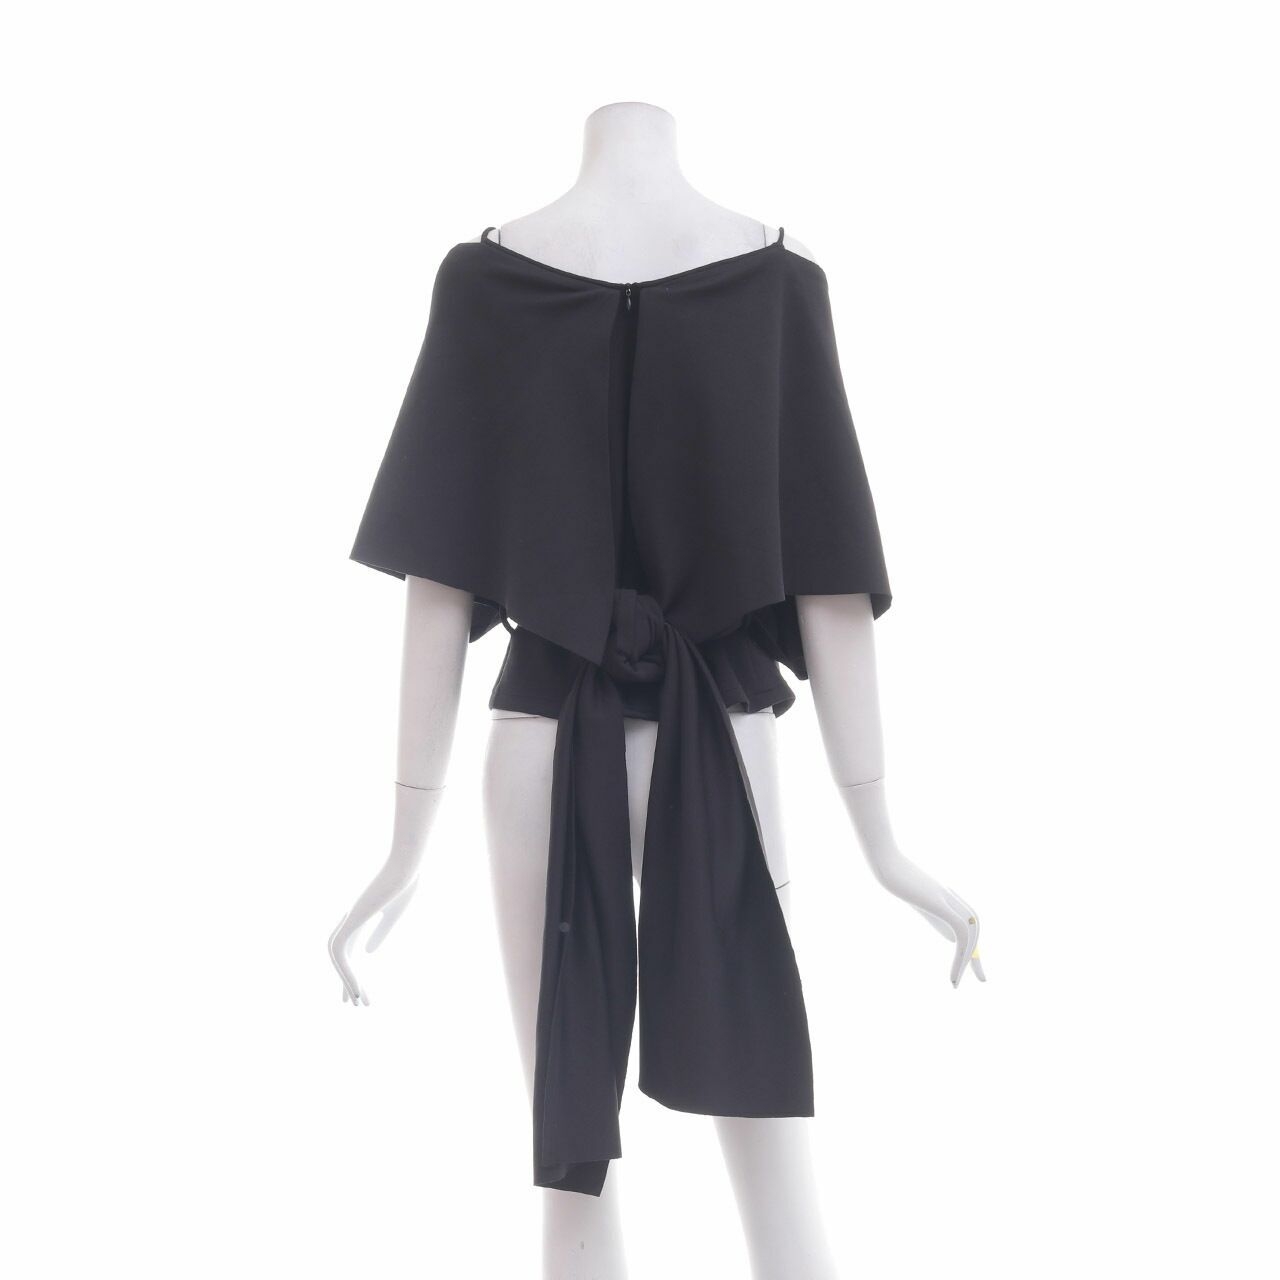 Nore.id Black Blouse